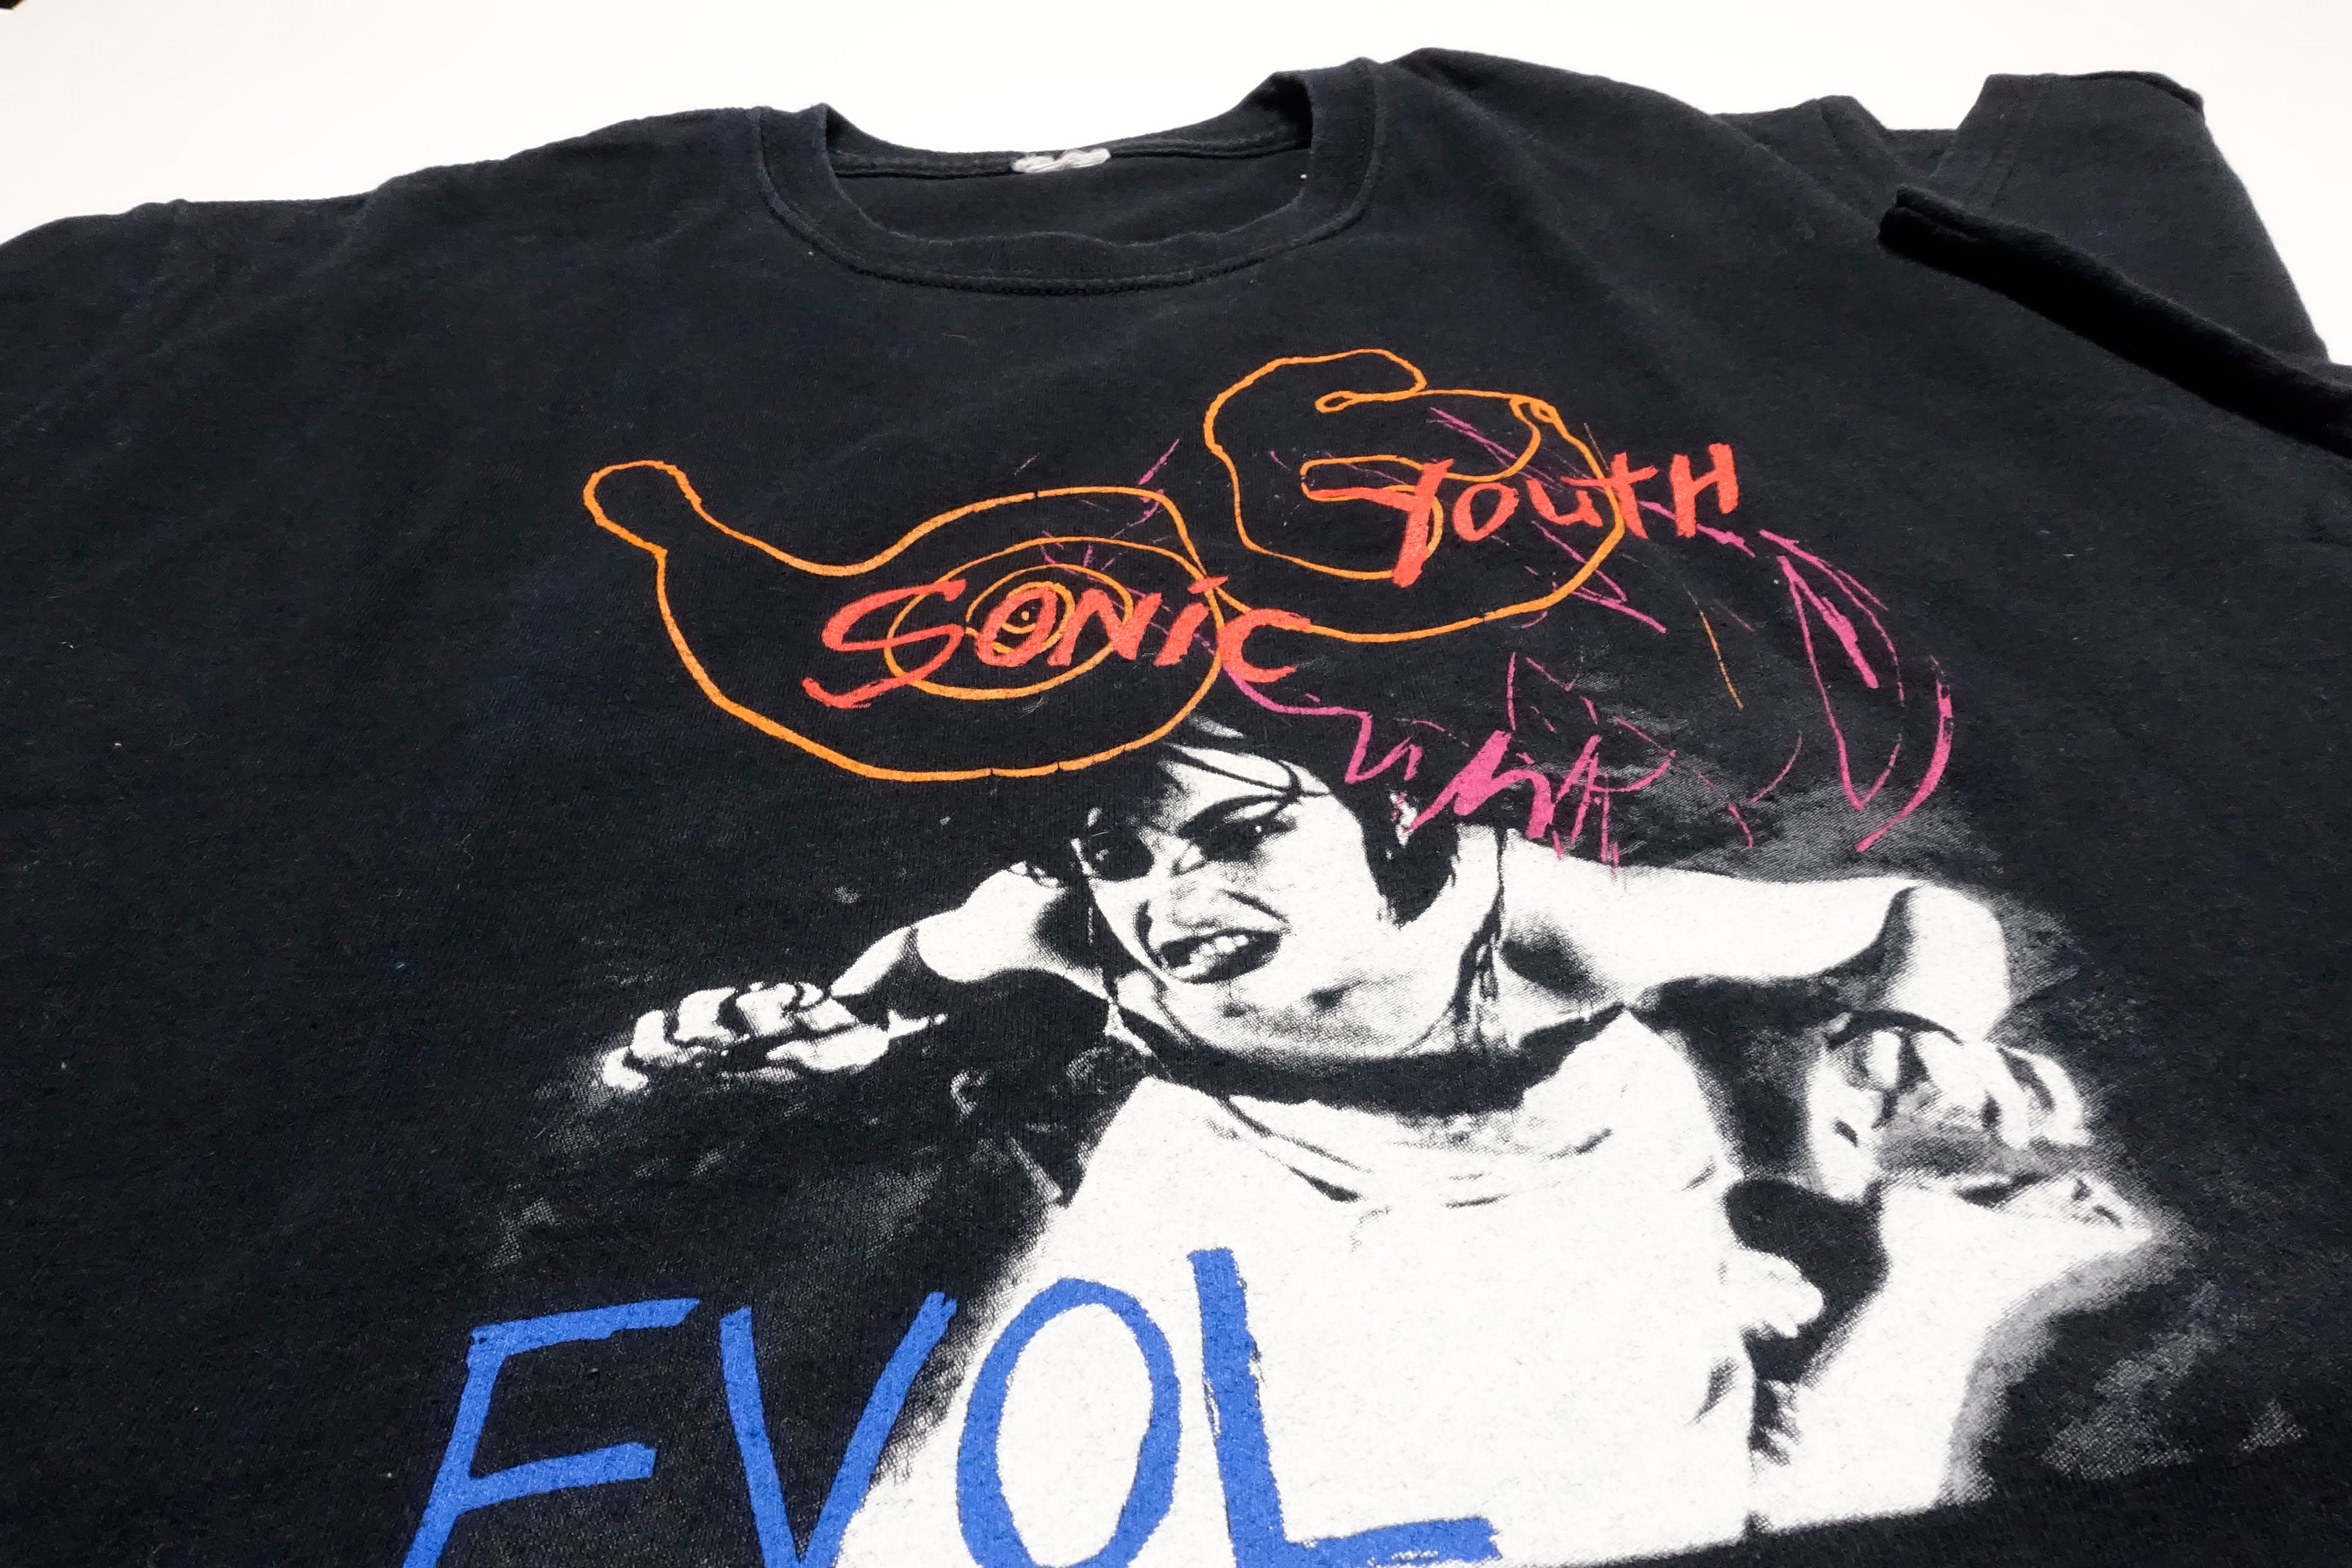 Sonic Youth - Evol late 90's Tour Shirt Size Large